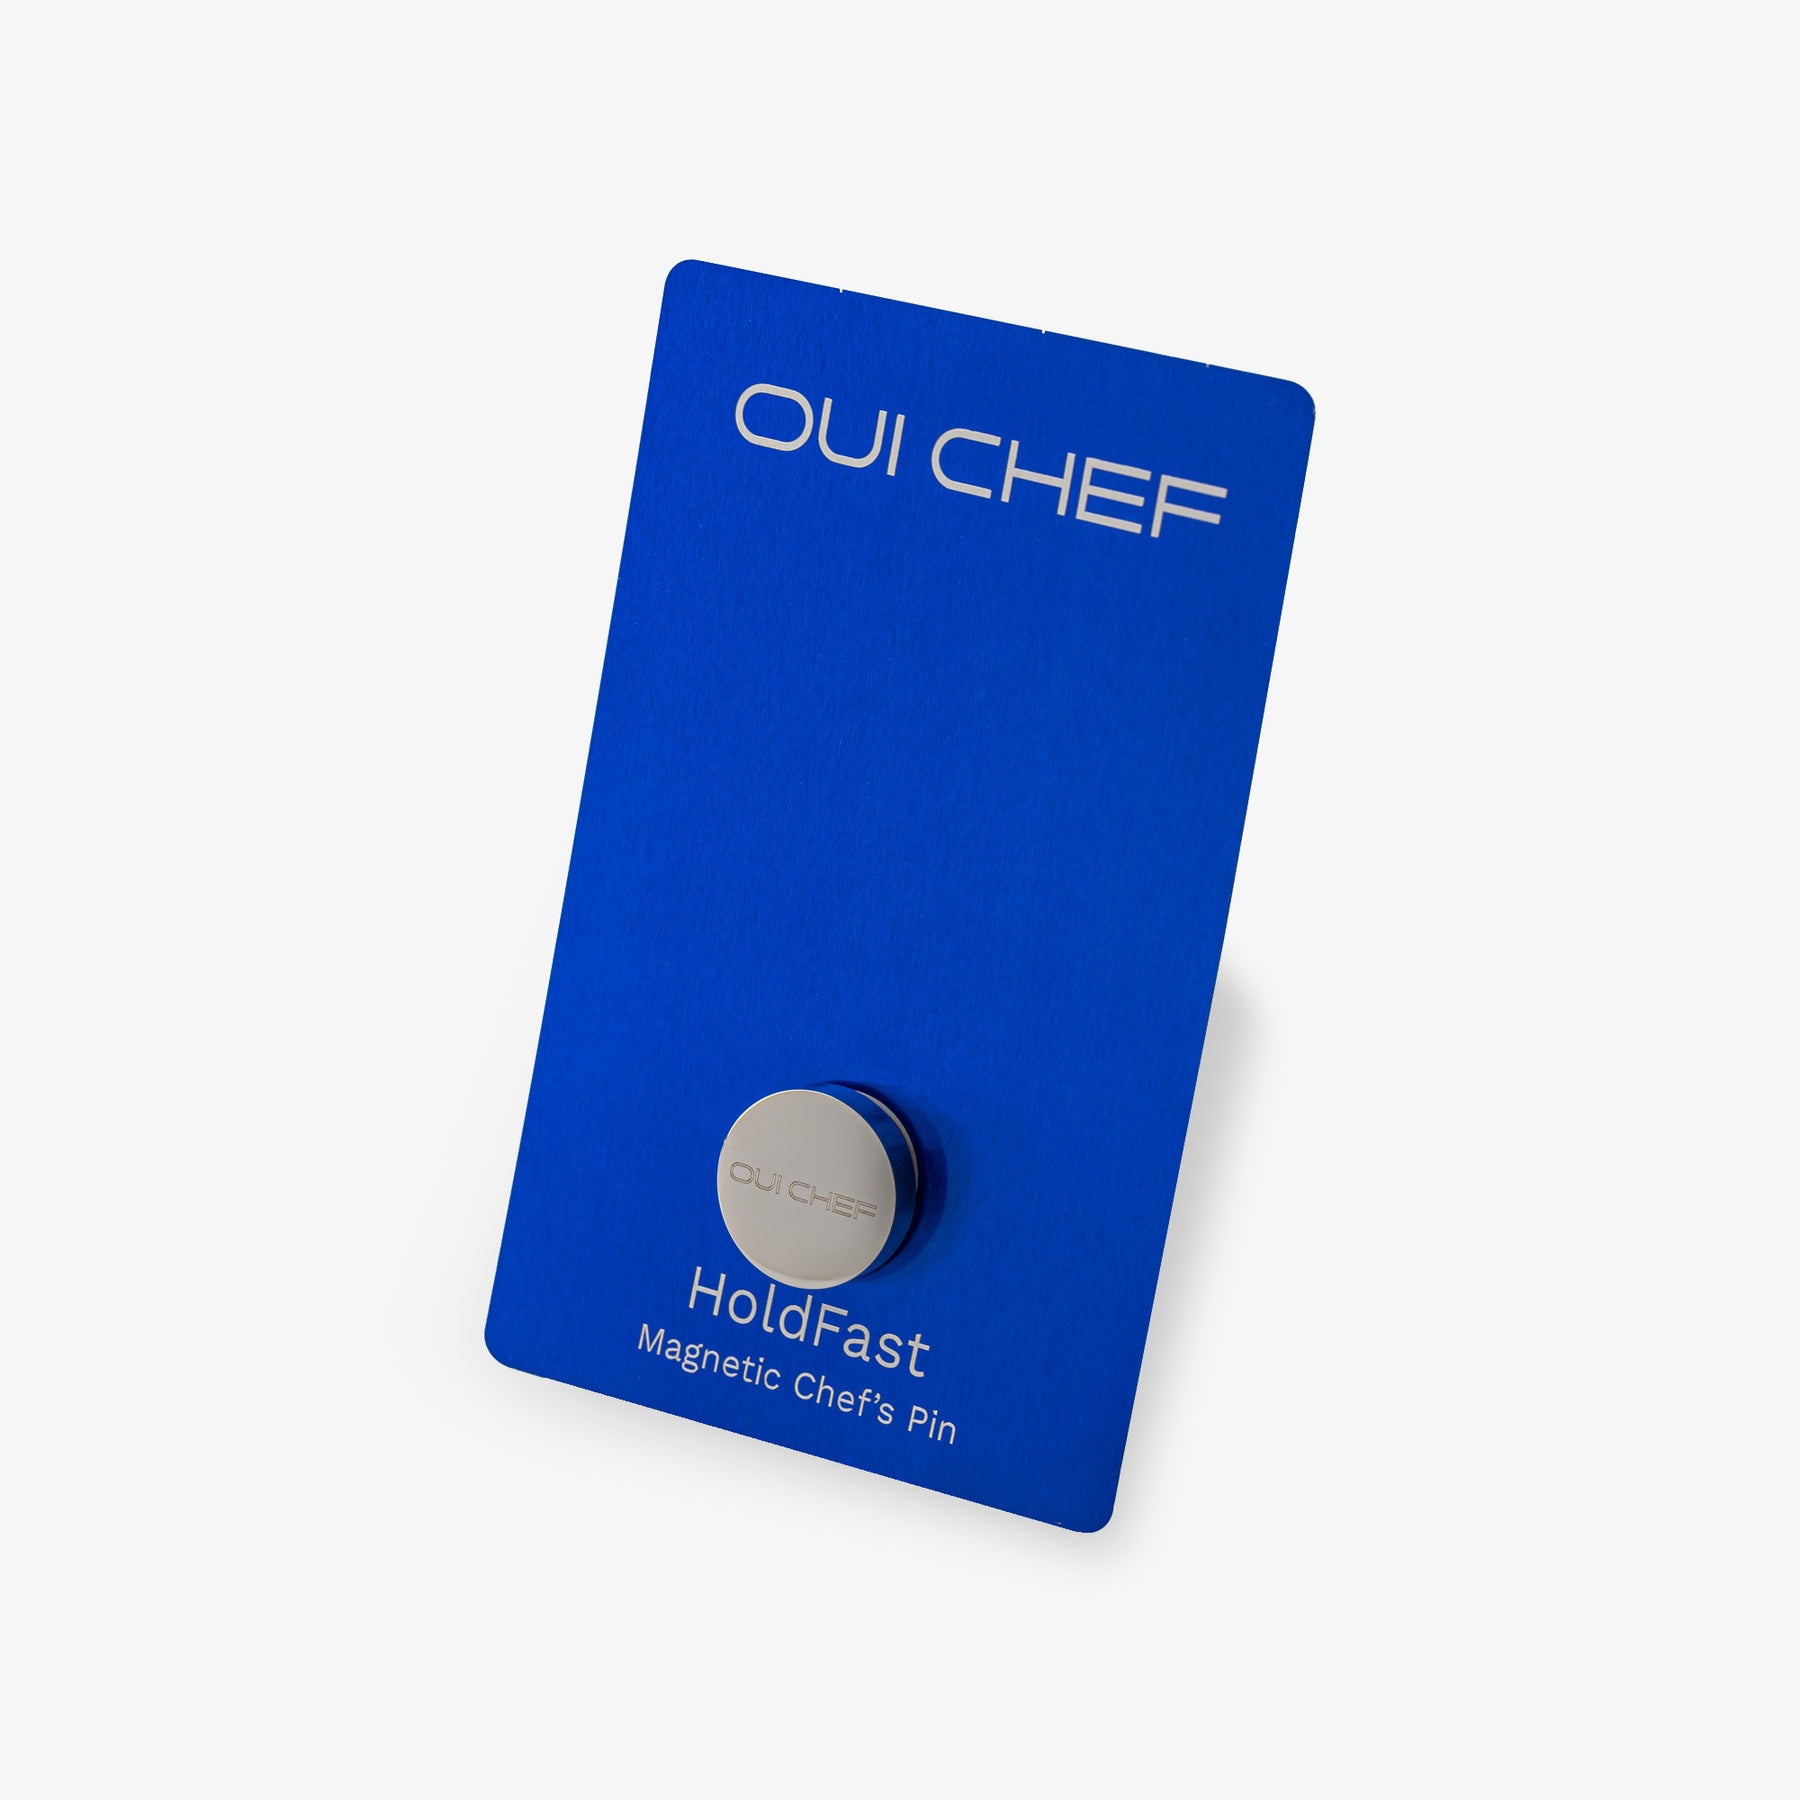 Oui_Chef_Magnetic_Chefs_Pin_Card